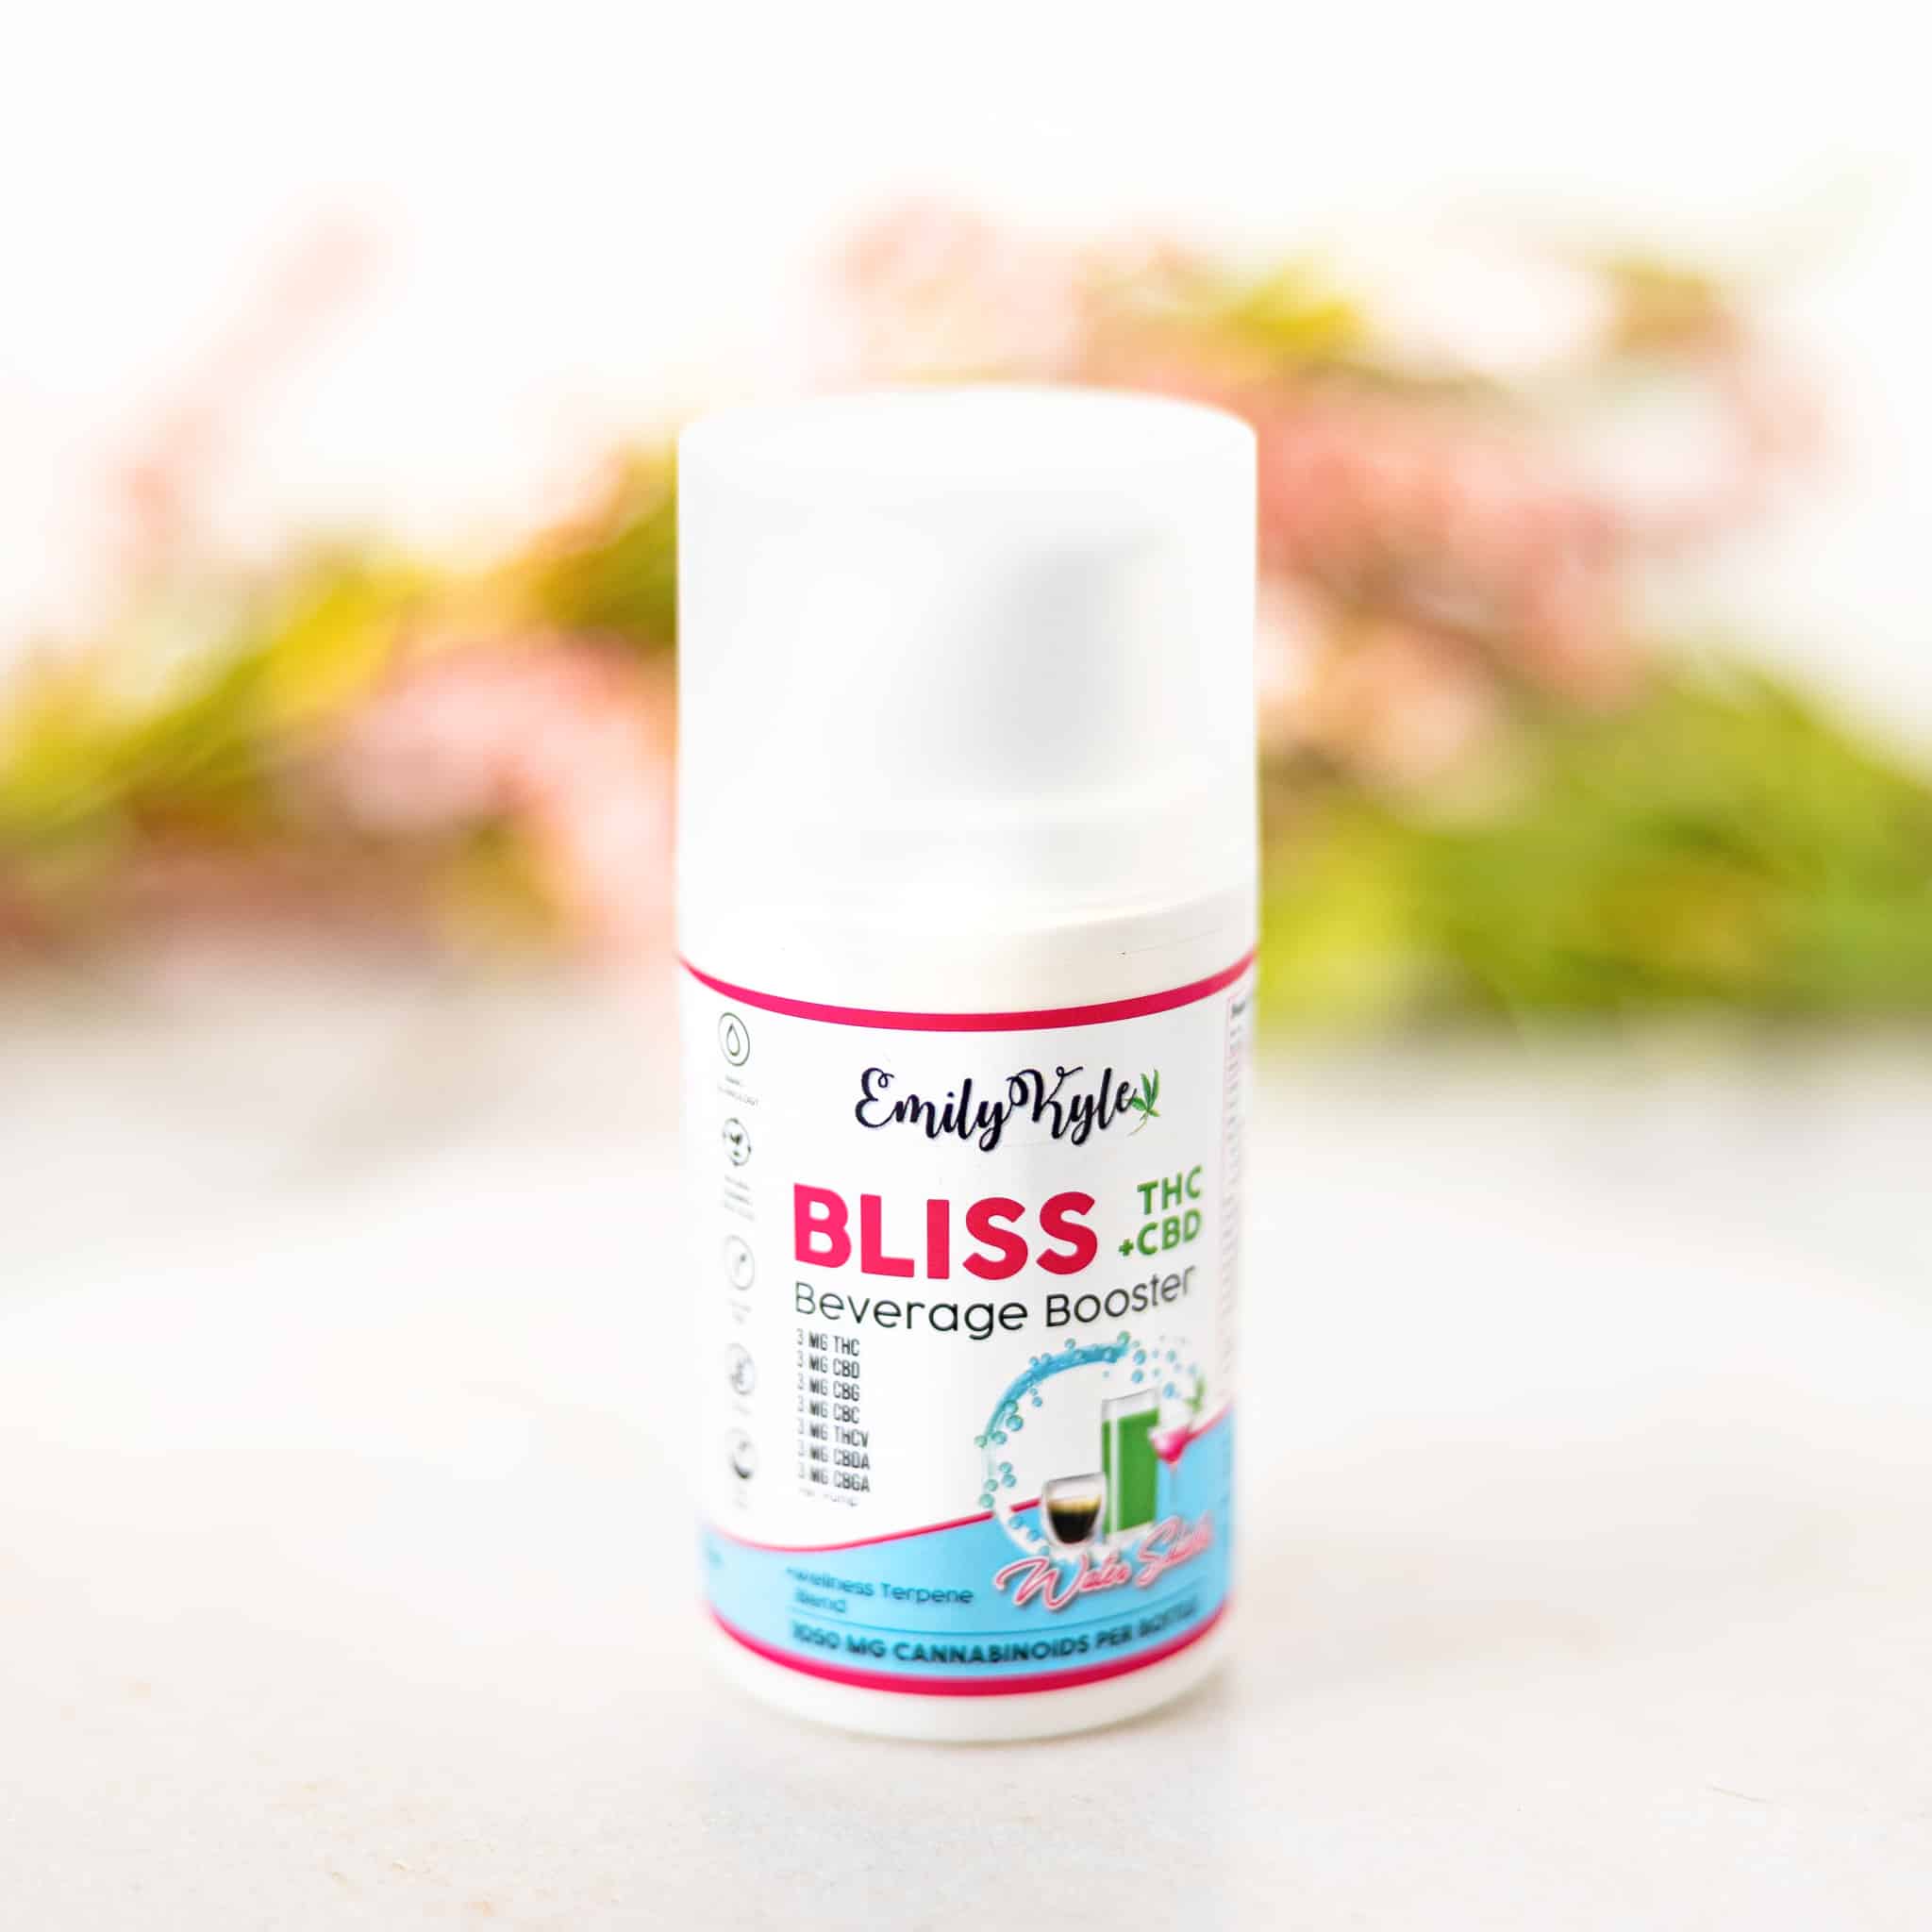 A picture of Emily Kyle's Bliss Beverage Booster.